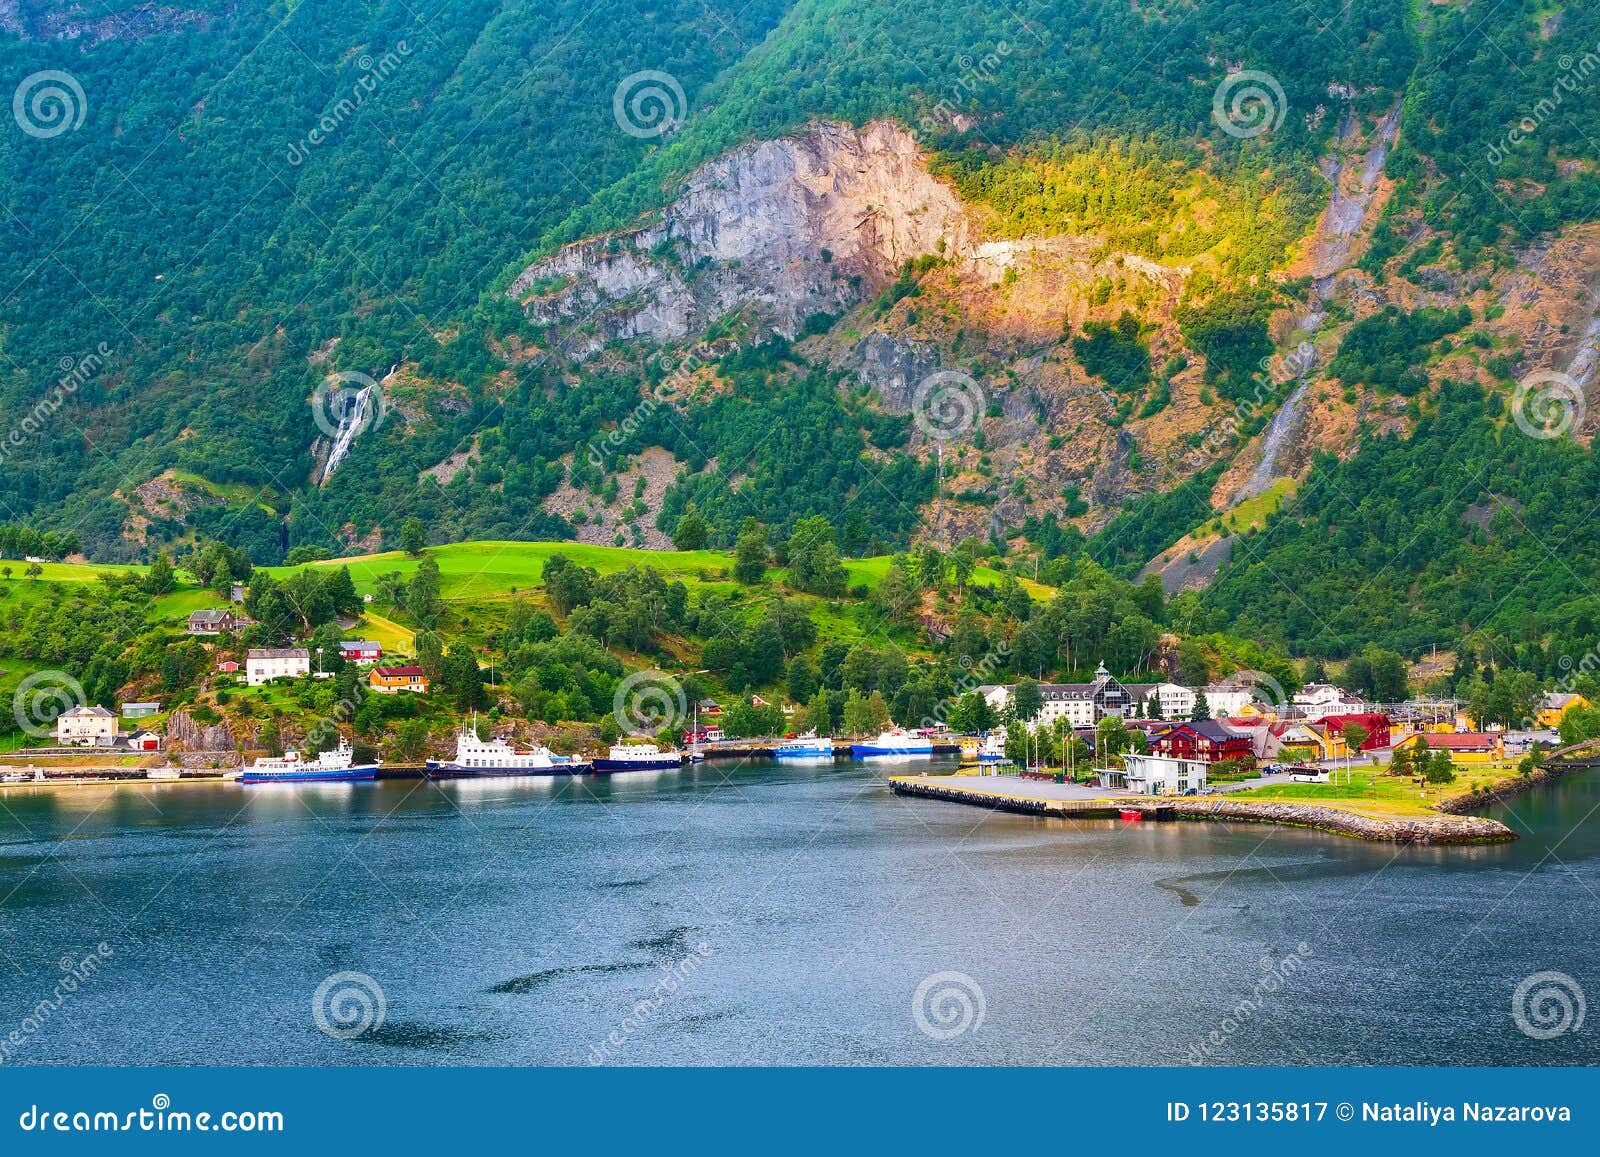 norway village and fjord landscape in flam